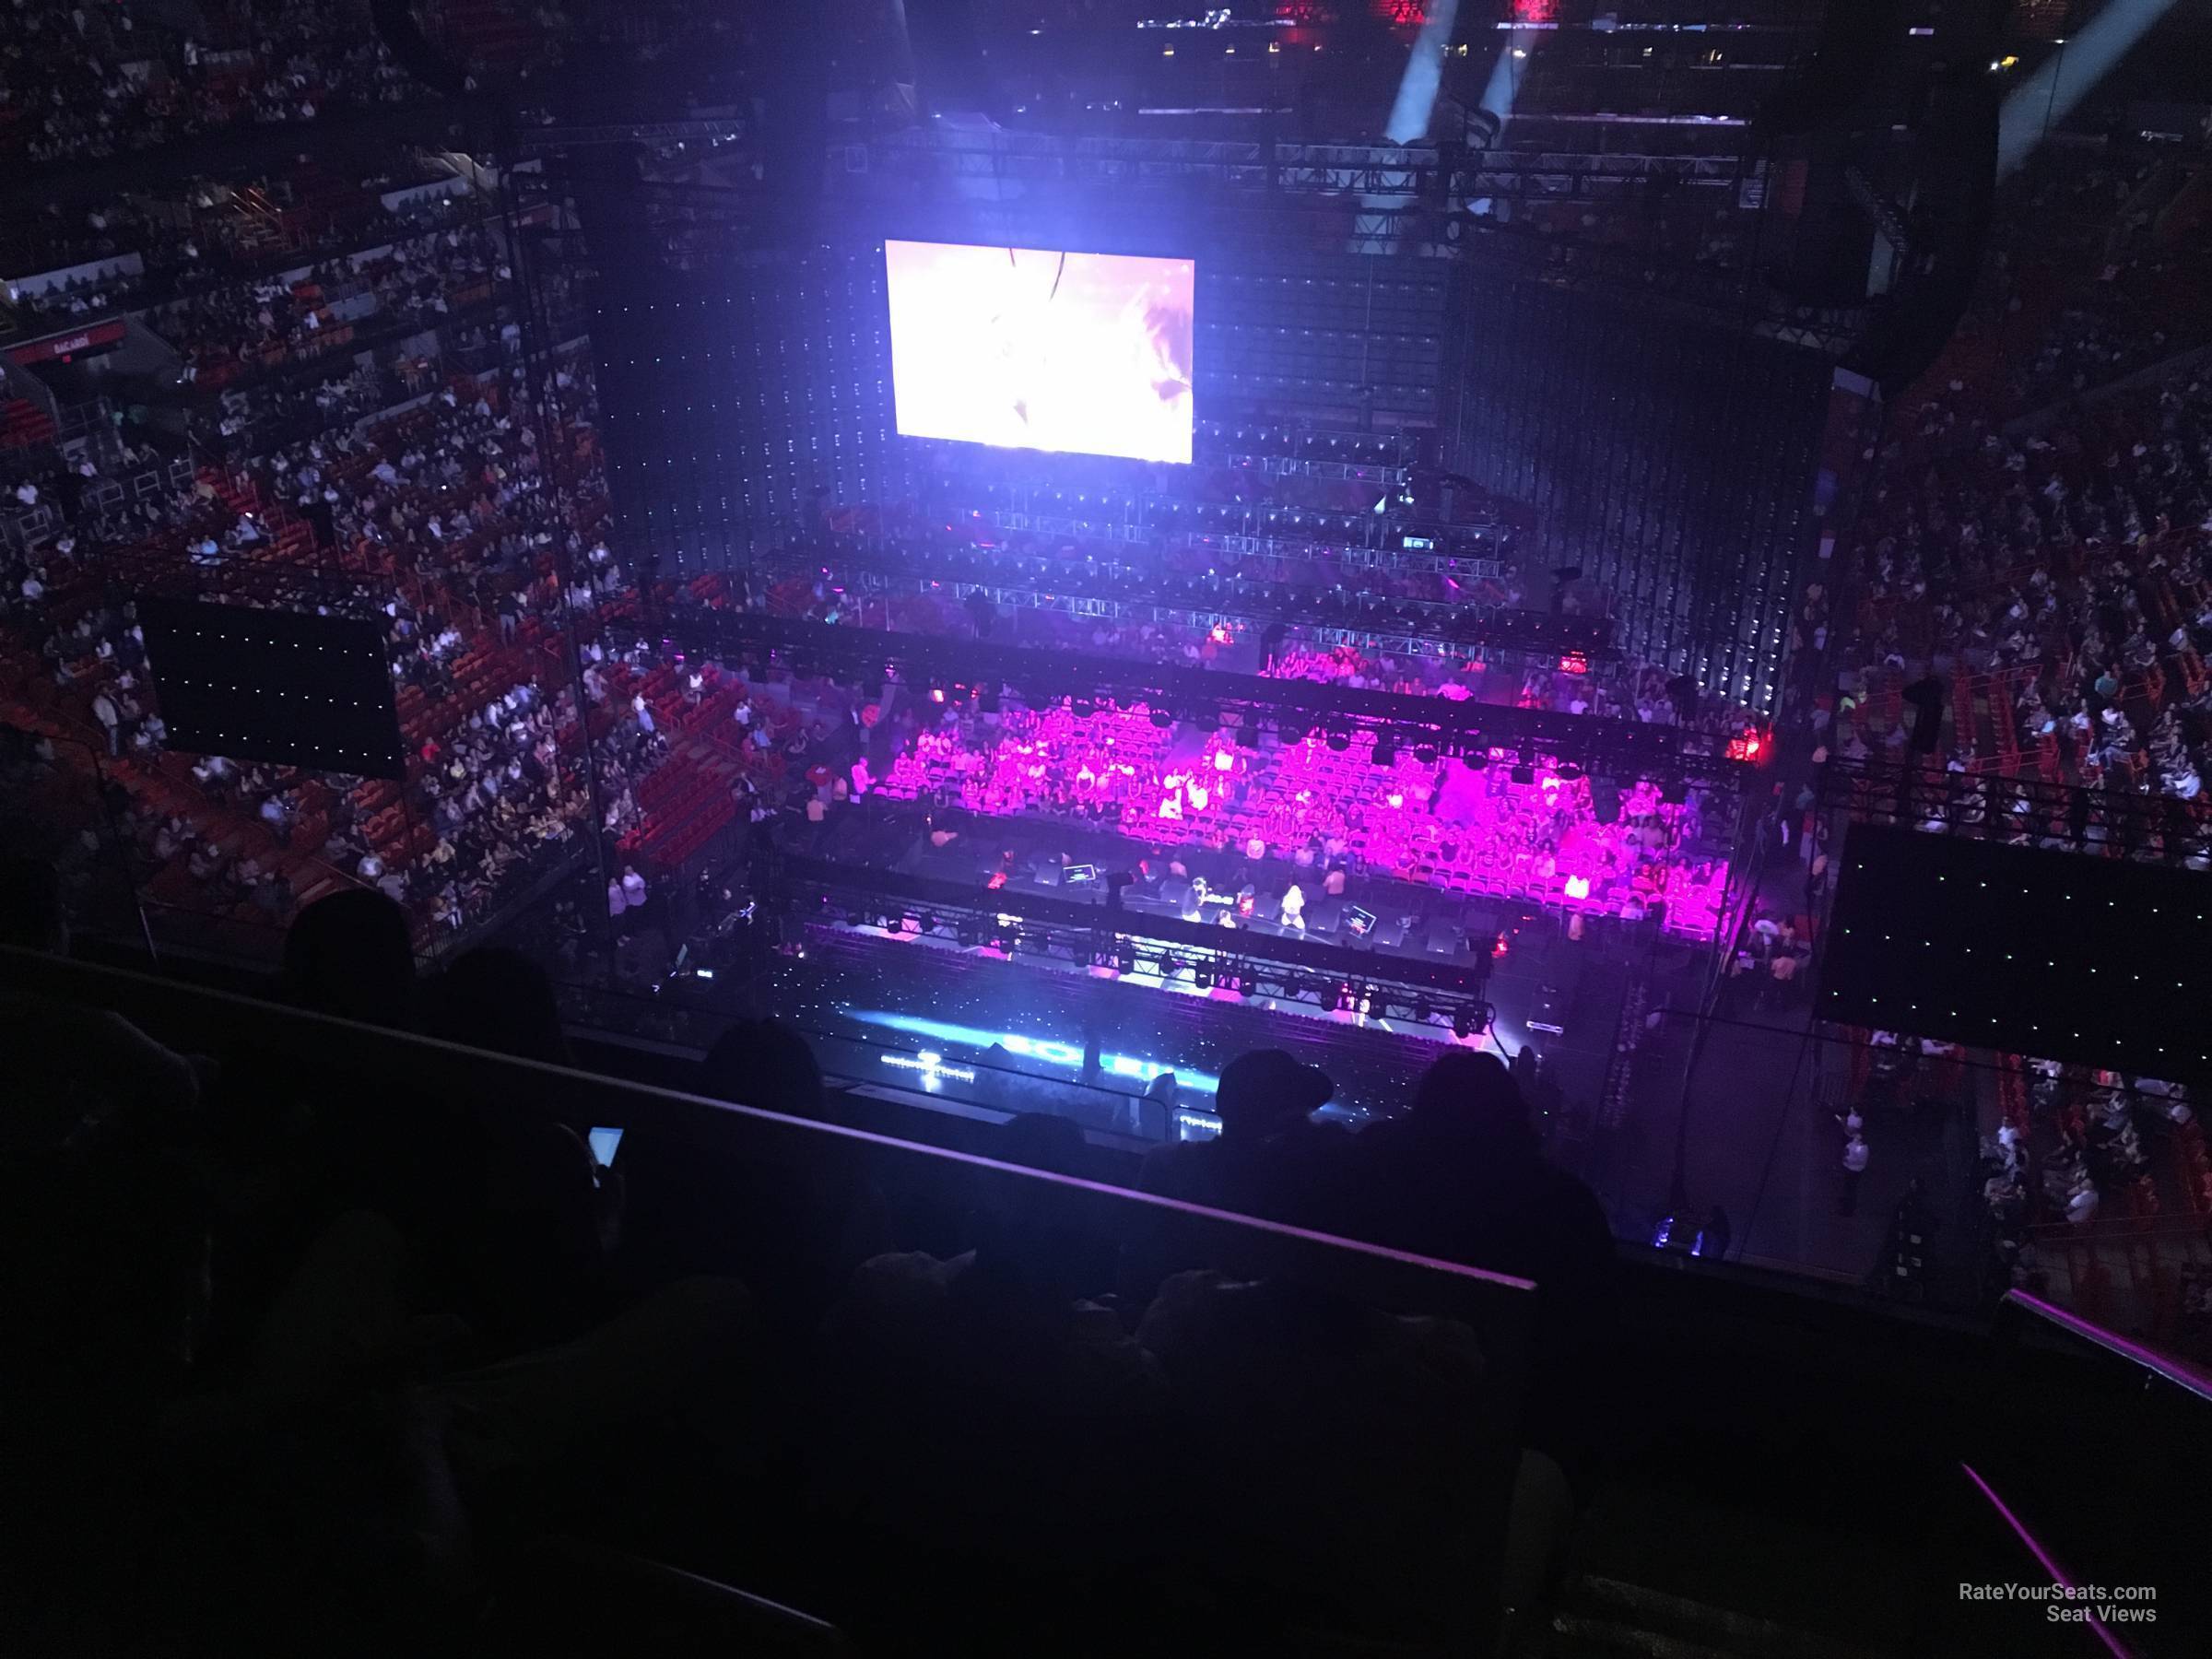 section 404, row 4 seat view  for concert - kaseya center